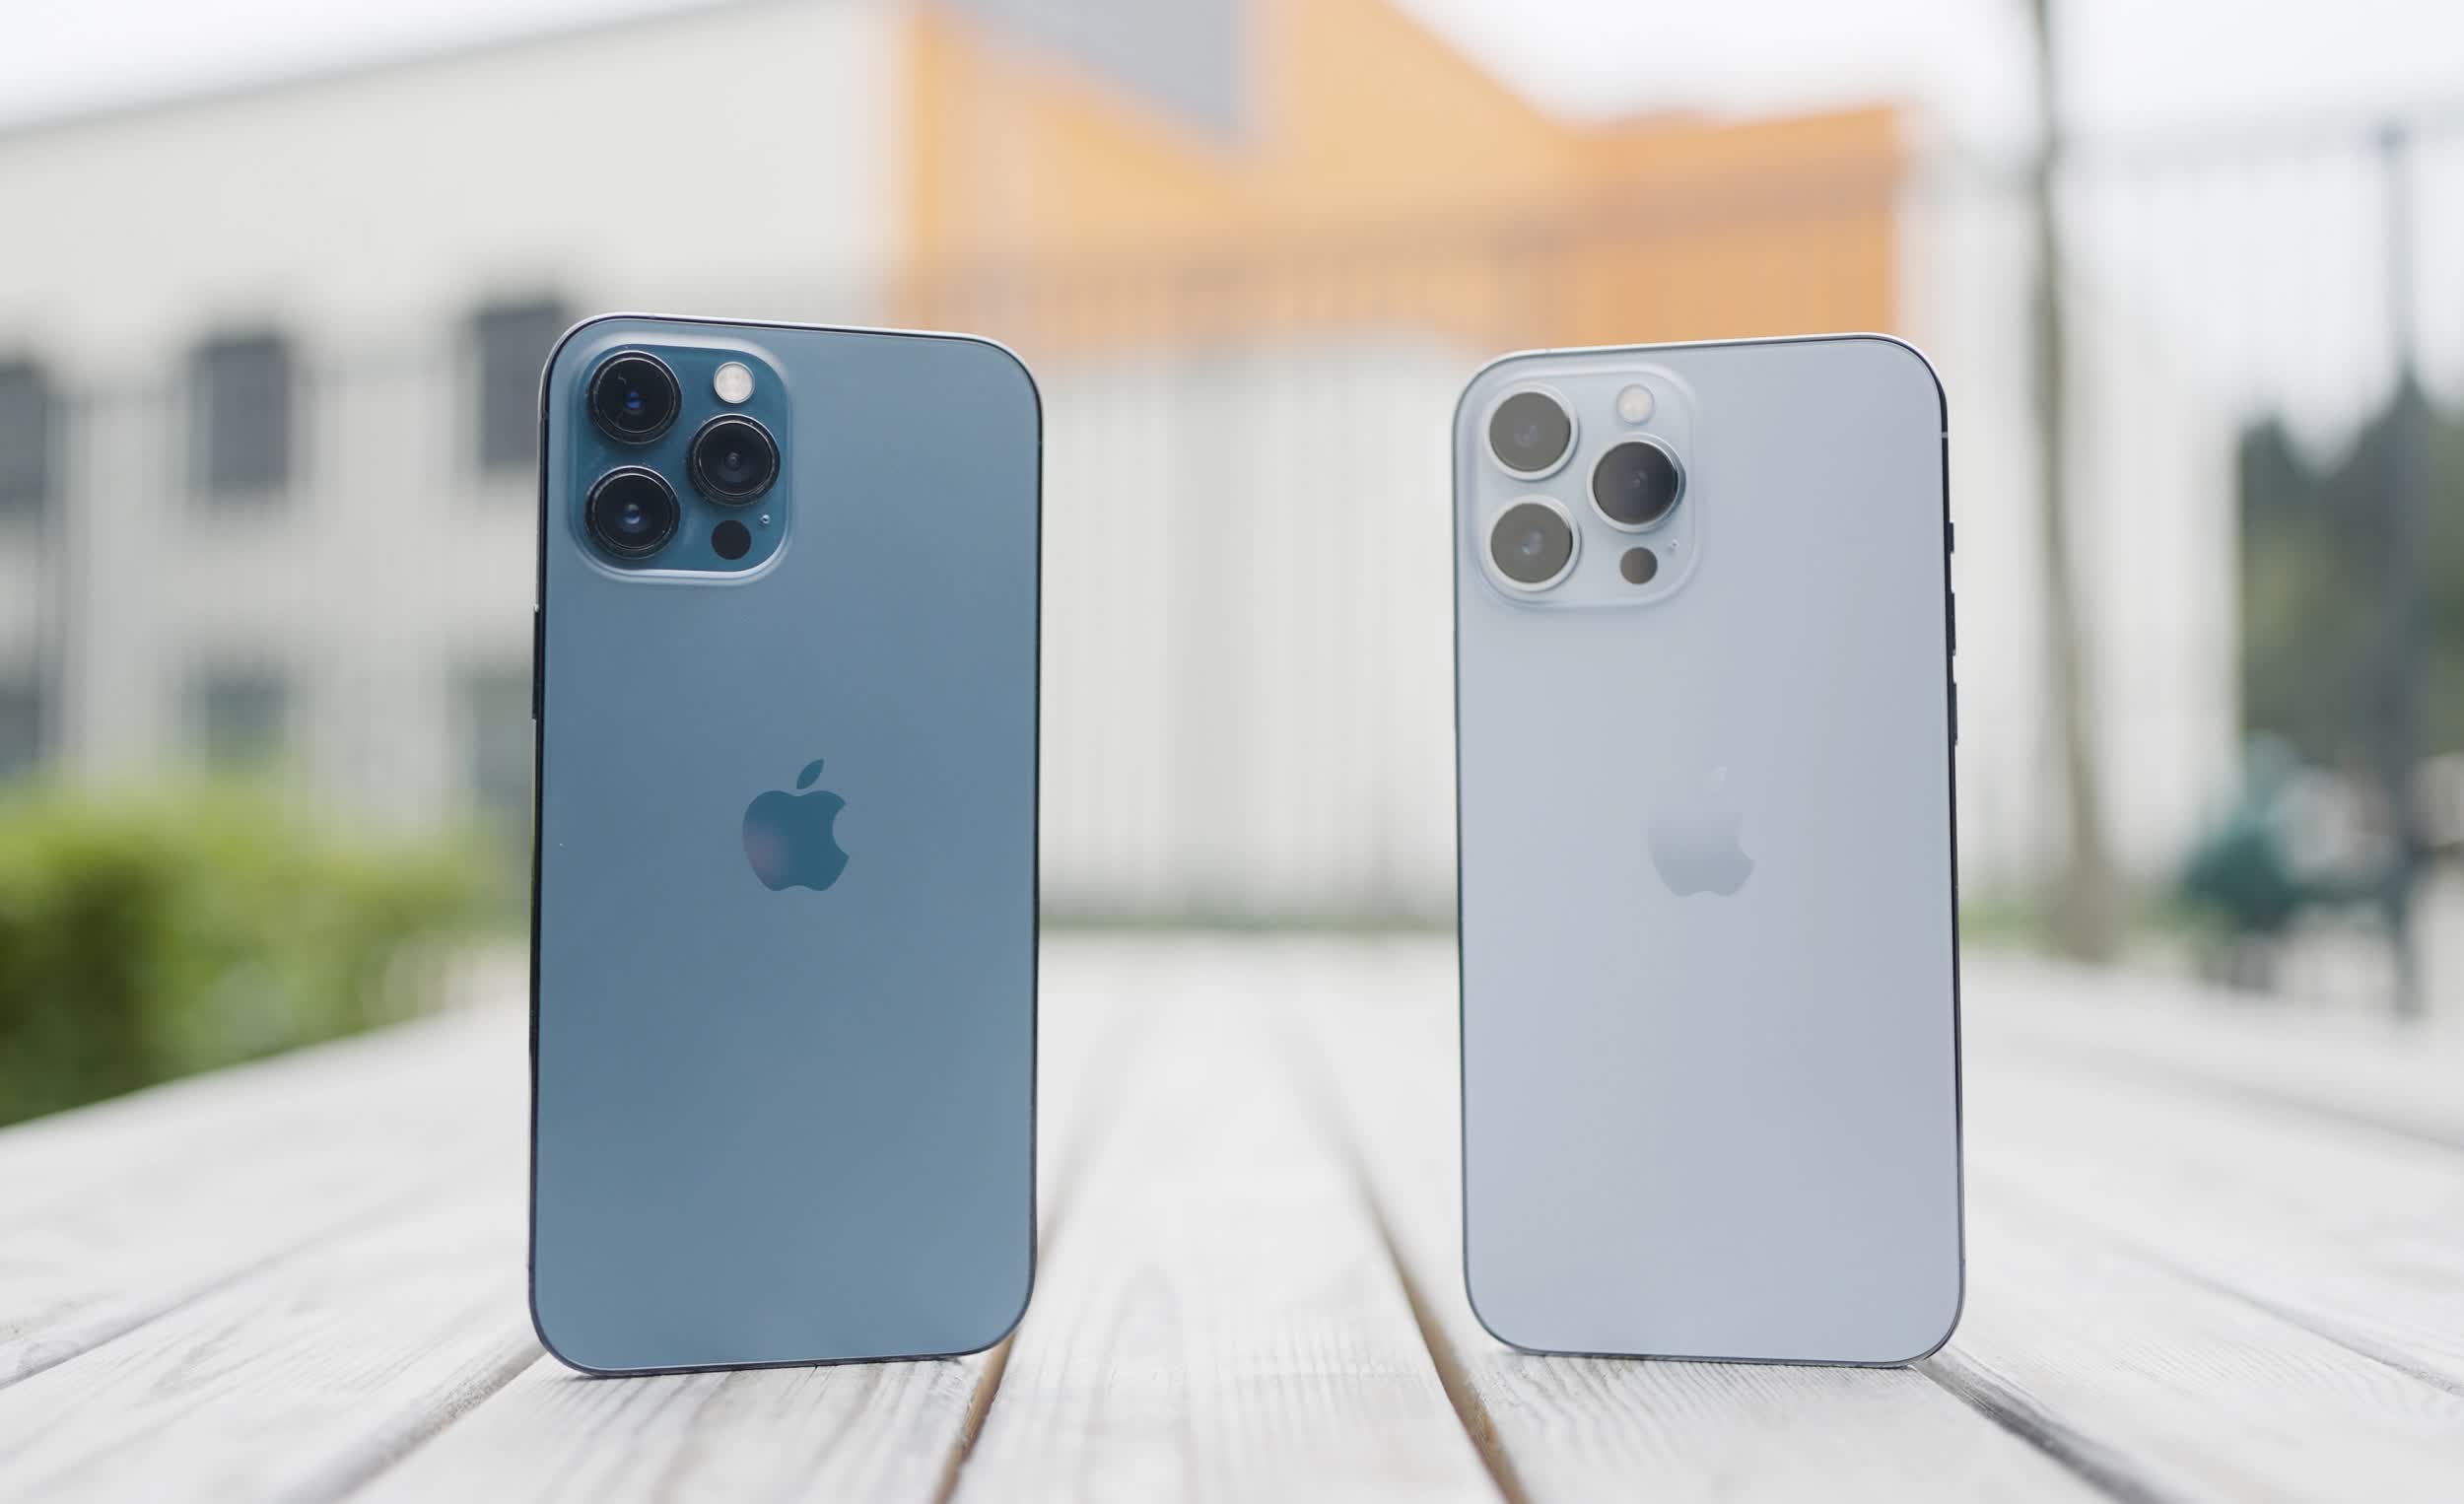 Apple was responsible for 22 percent of global smartphone shipments in Q4 2021 thumbnail